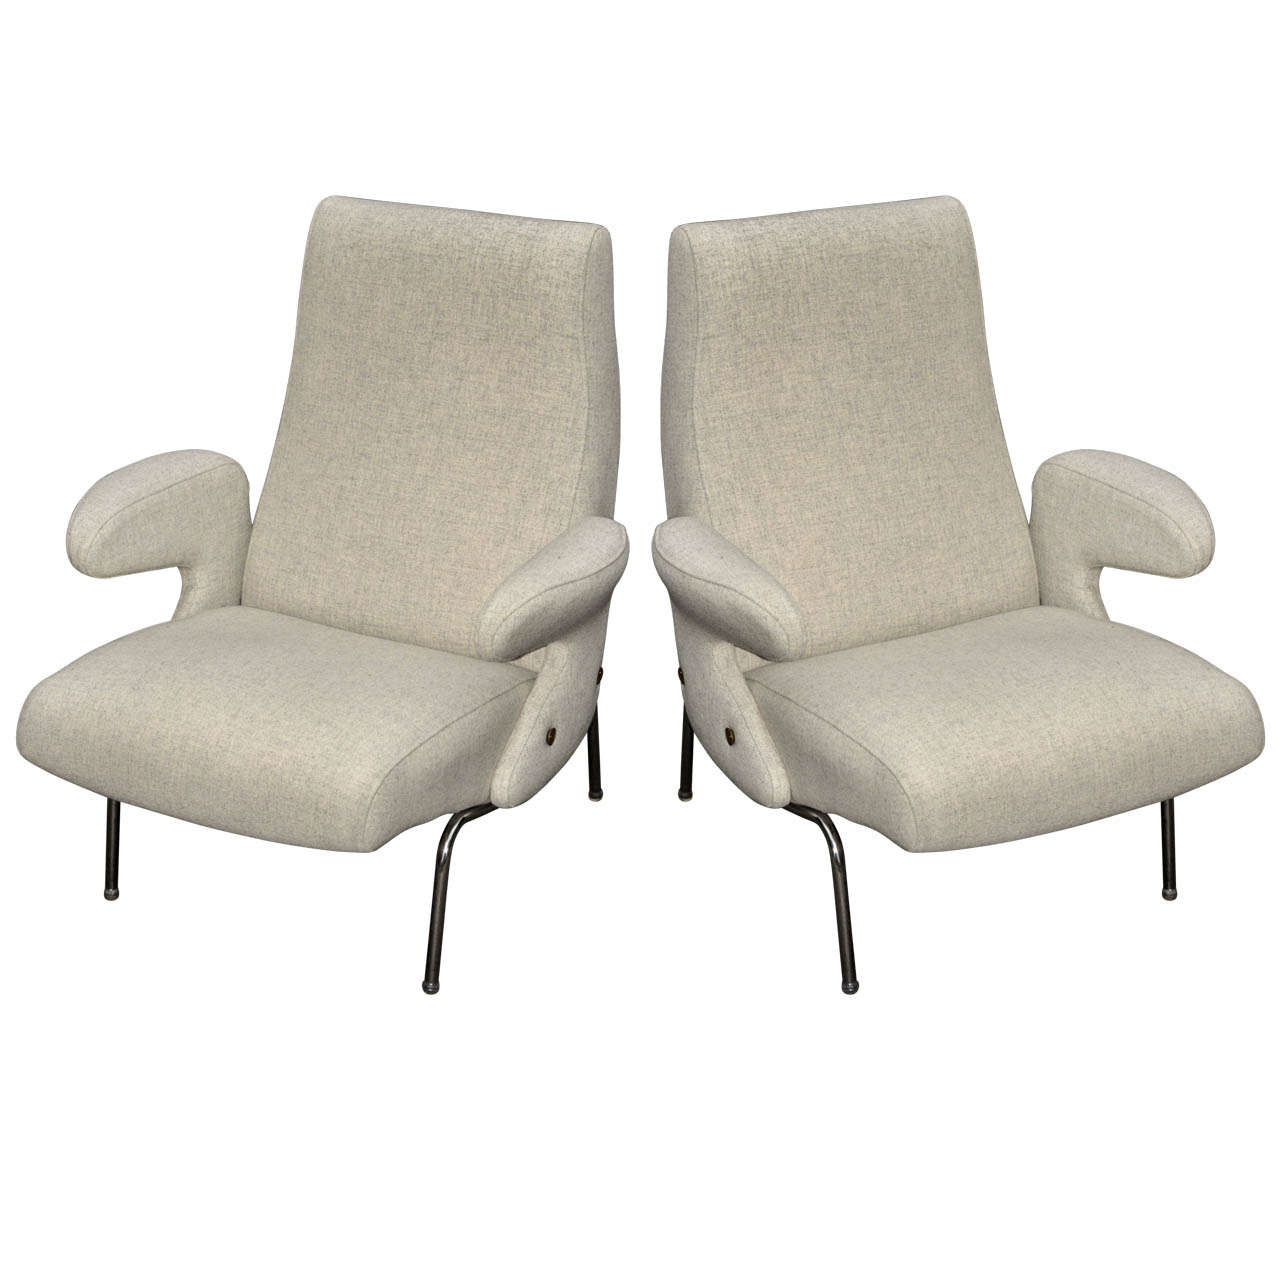 Pair of 1954 Armchairs by Eugenio Carboni For Sale